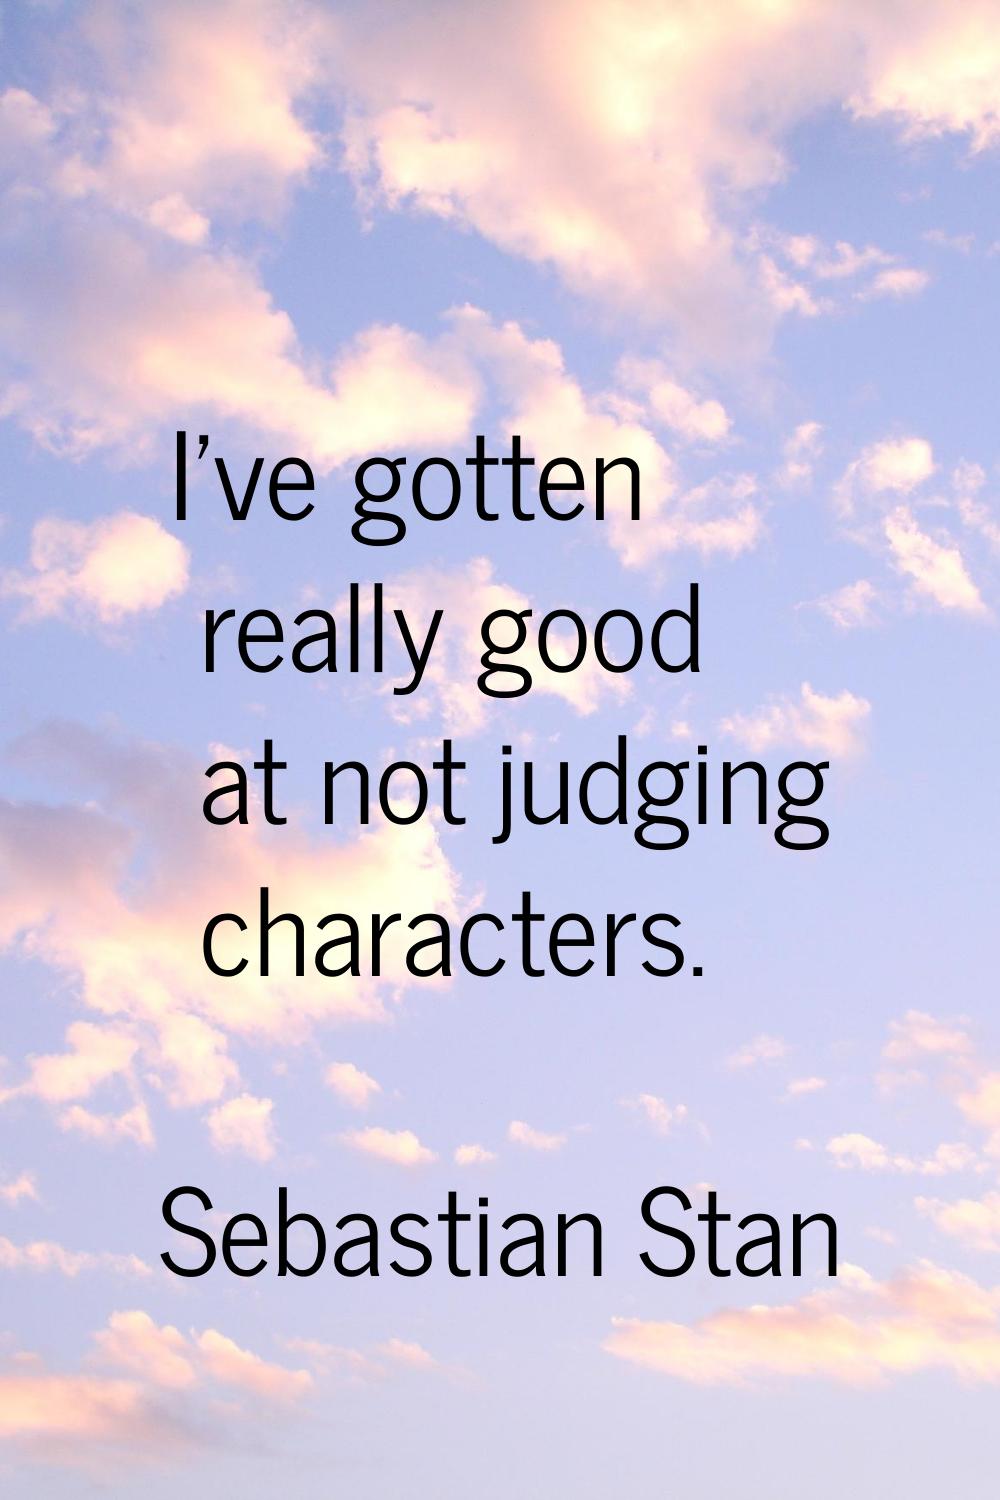 I've gotten really good at not judging characters.